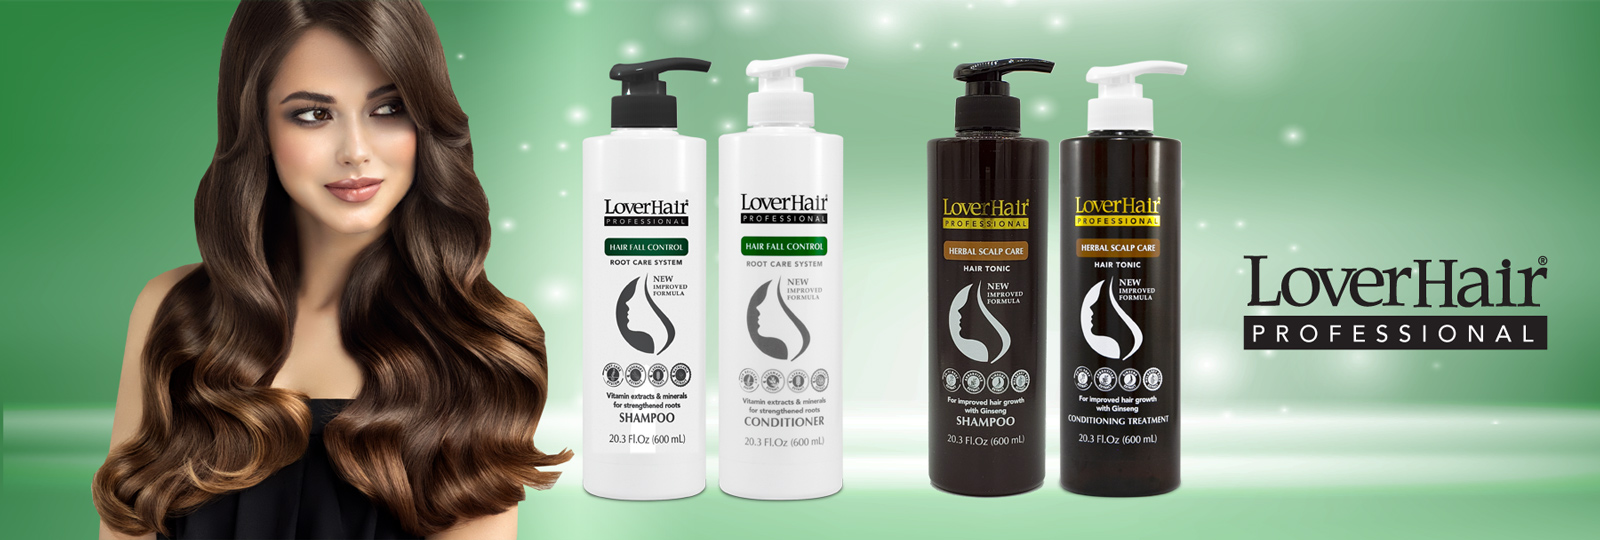 LoverHair Professional shampoo and conditioner